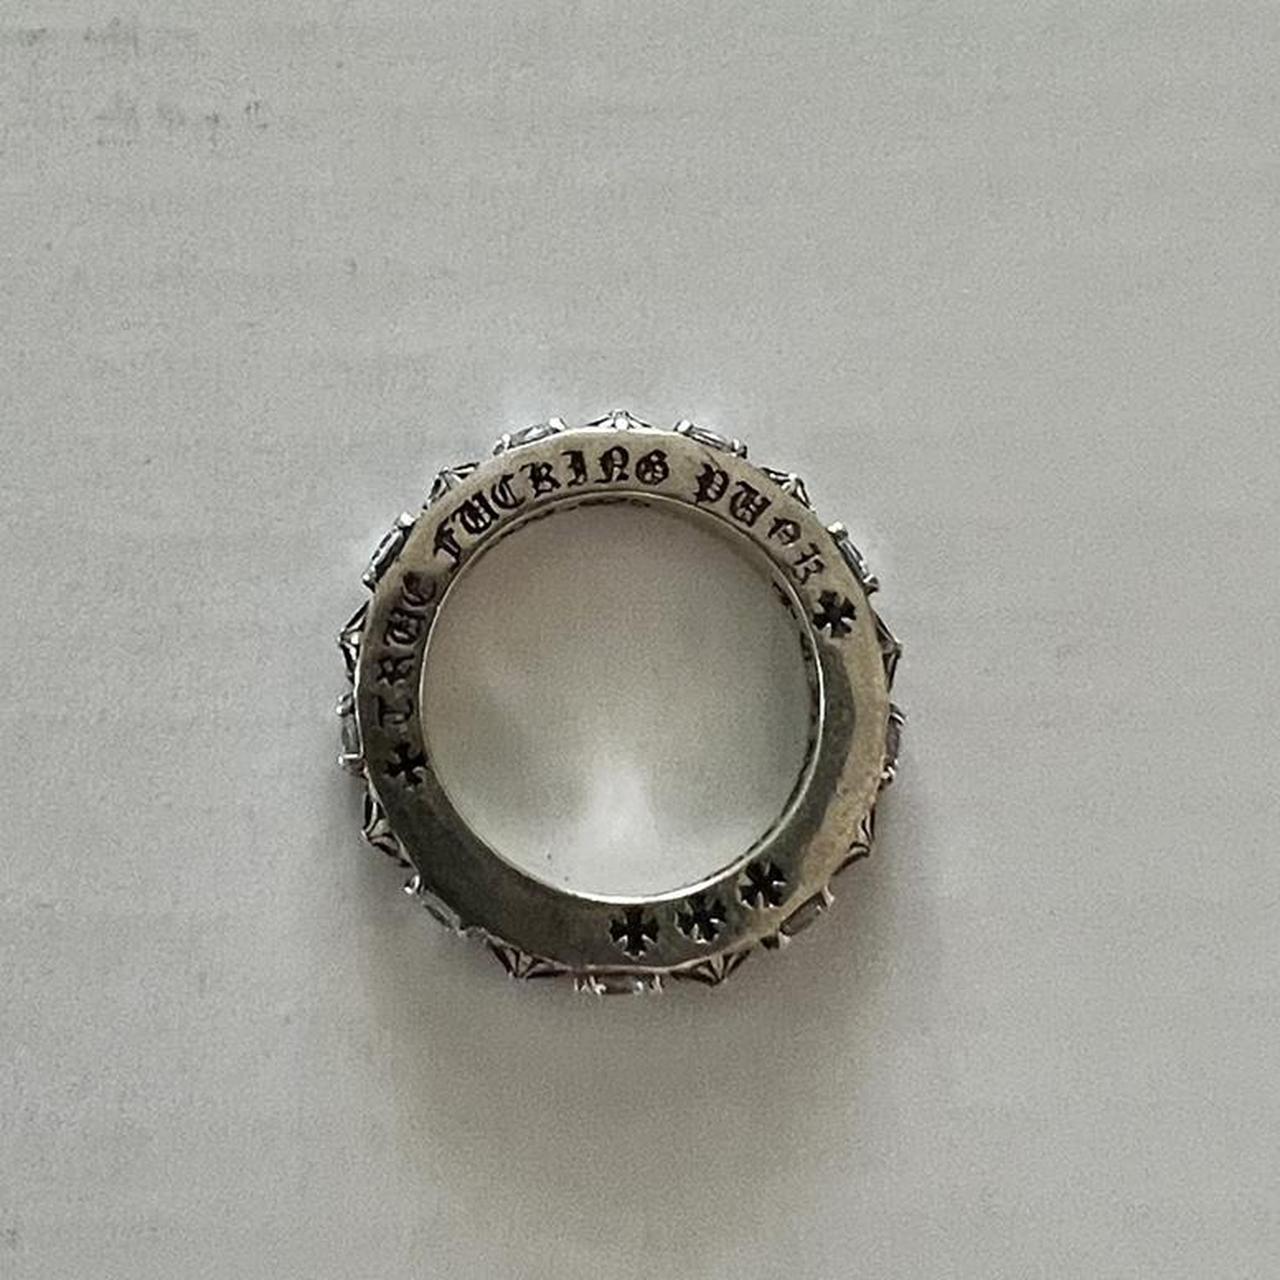 Chrome hearts, True fucking punk ring, Size 6 but can